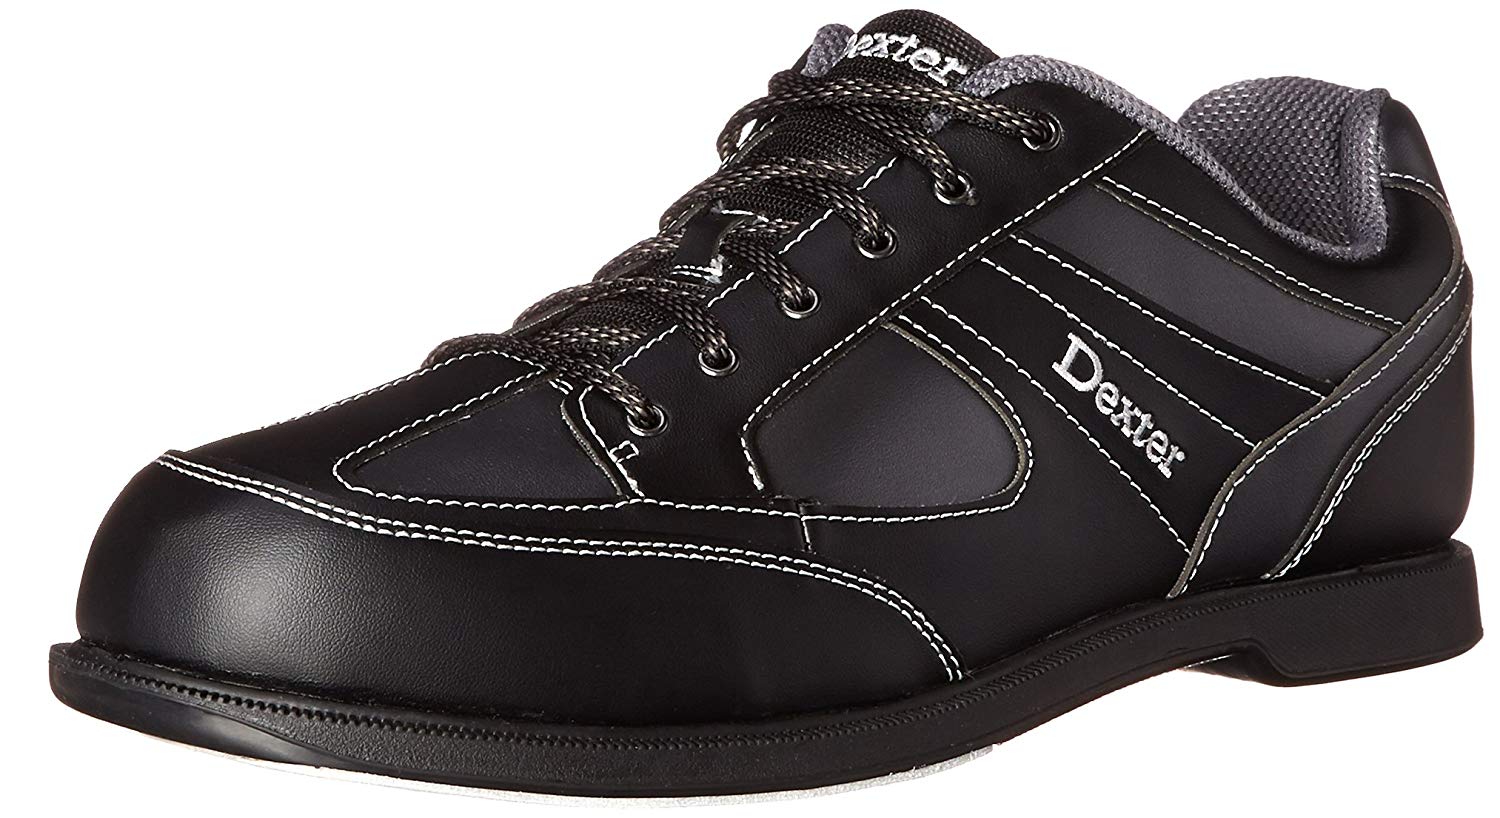 Best bowling shoes? Top 5 Best Products